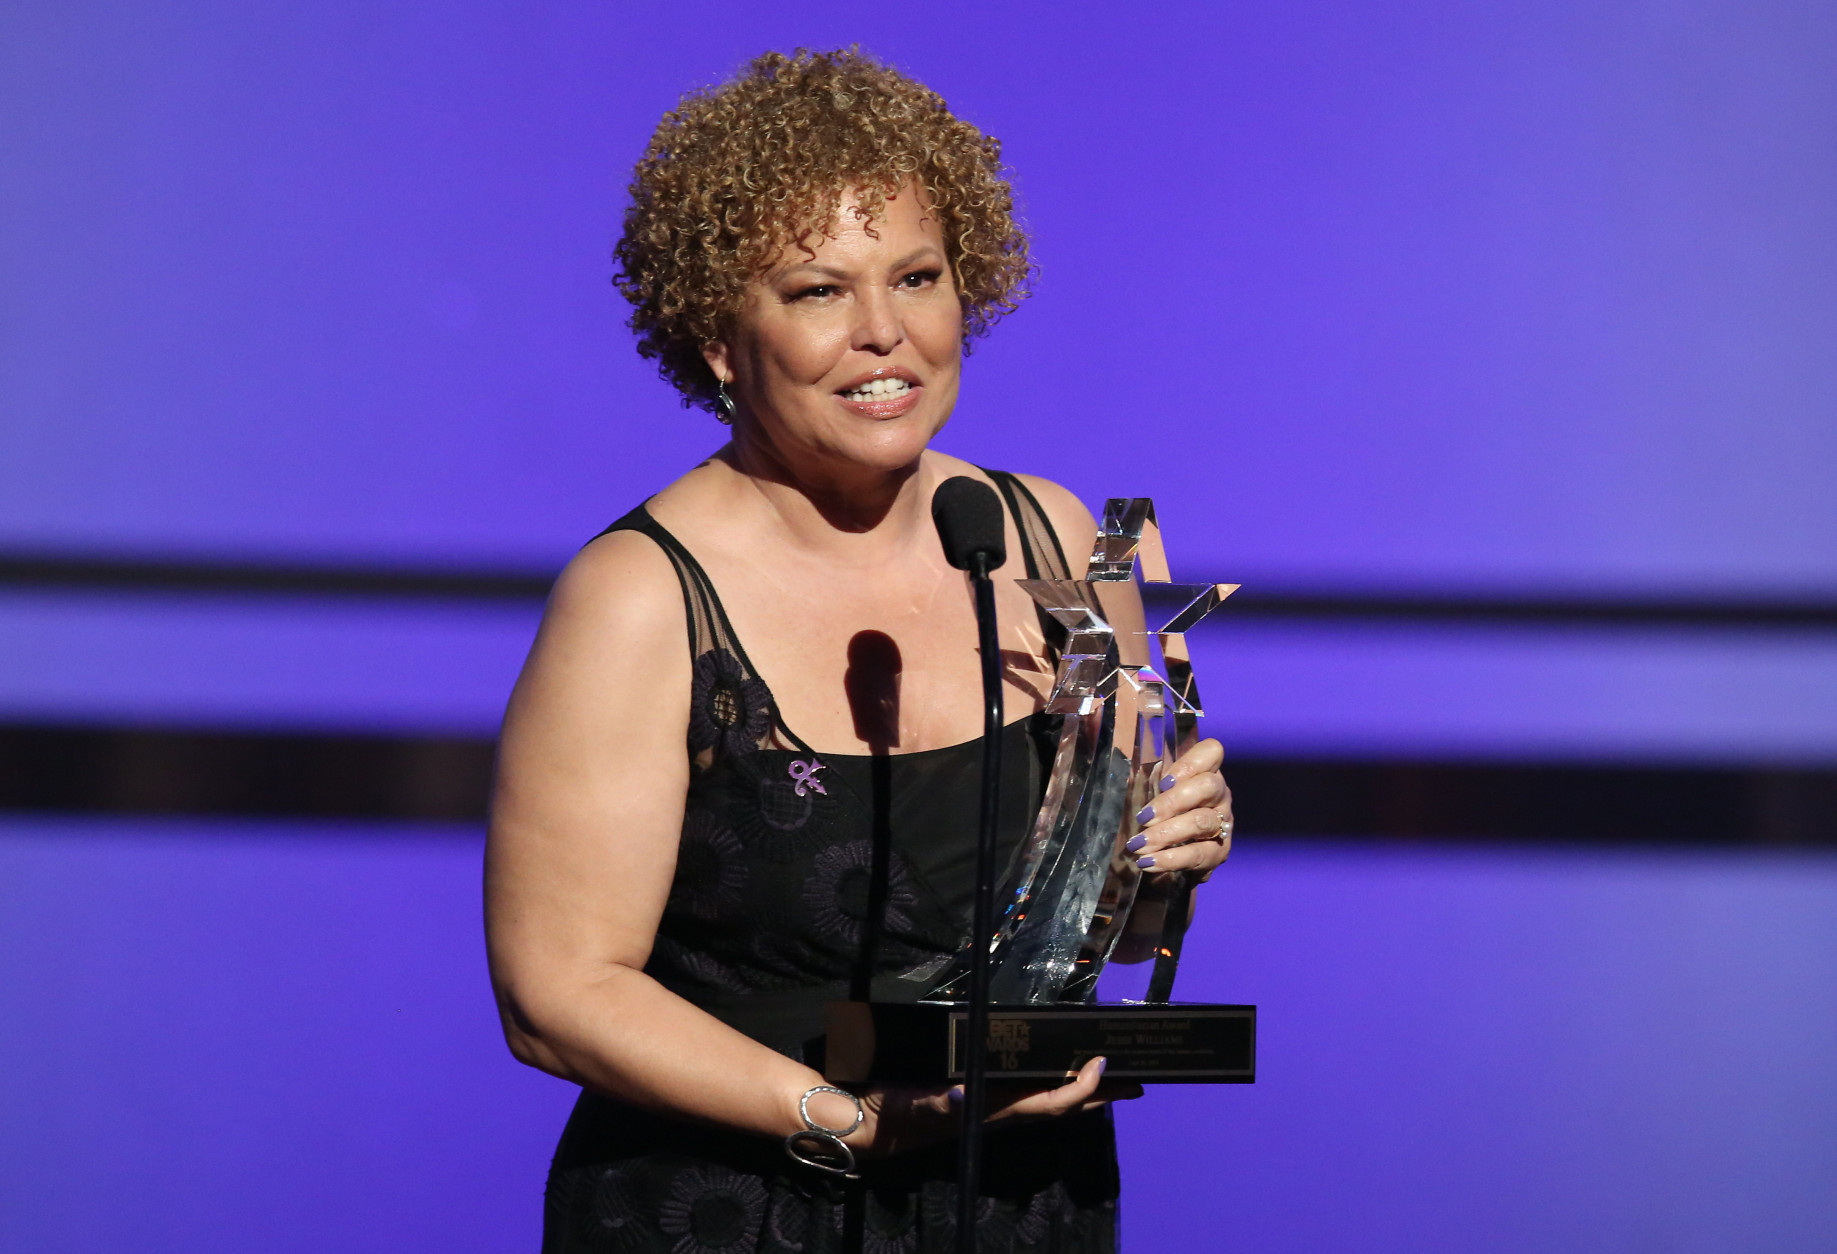 Debra Lee, Chairman and CEO of BET, presents the humanitarian award at the BET Awards at the Microsoft Theater on Sunday, June 26, 2016, in Los Angeles. (Photo by Matt Sayles/Invision/AP)